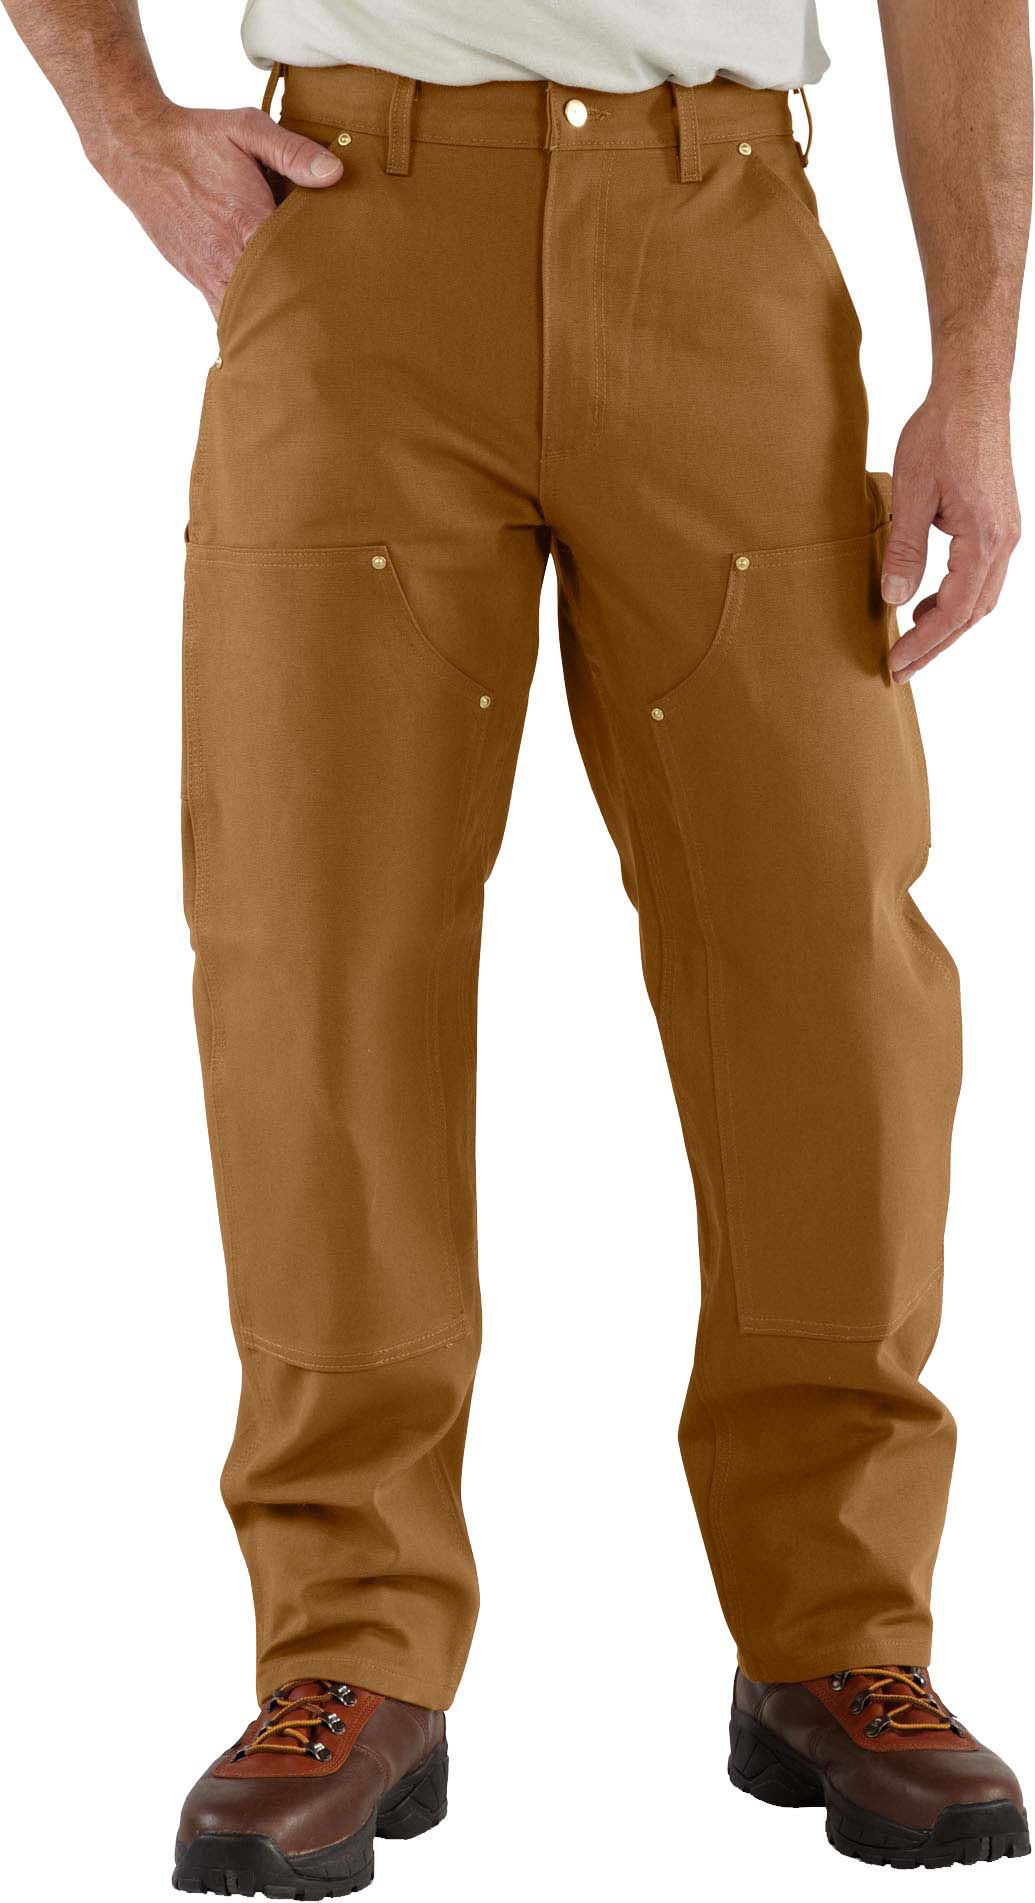 carhartt pants with knee pads